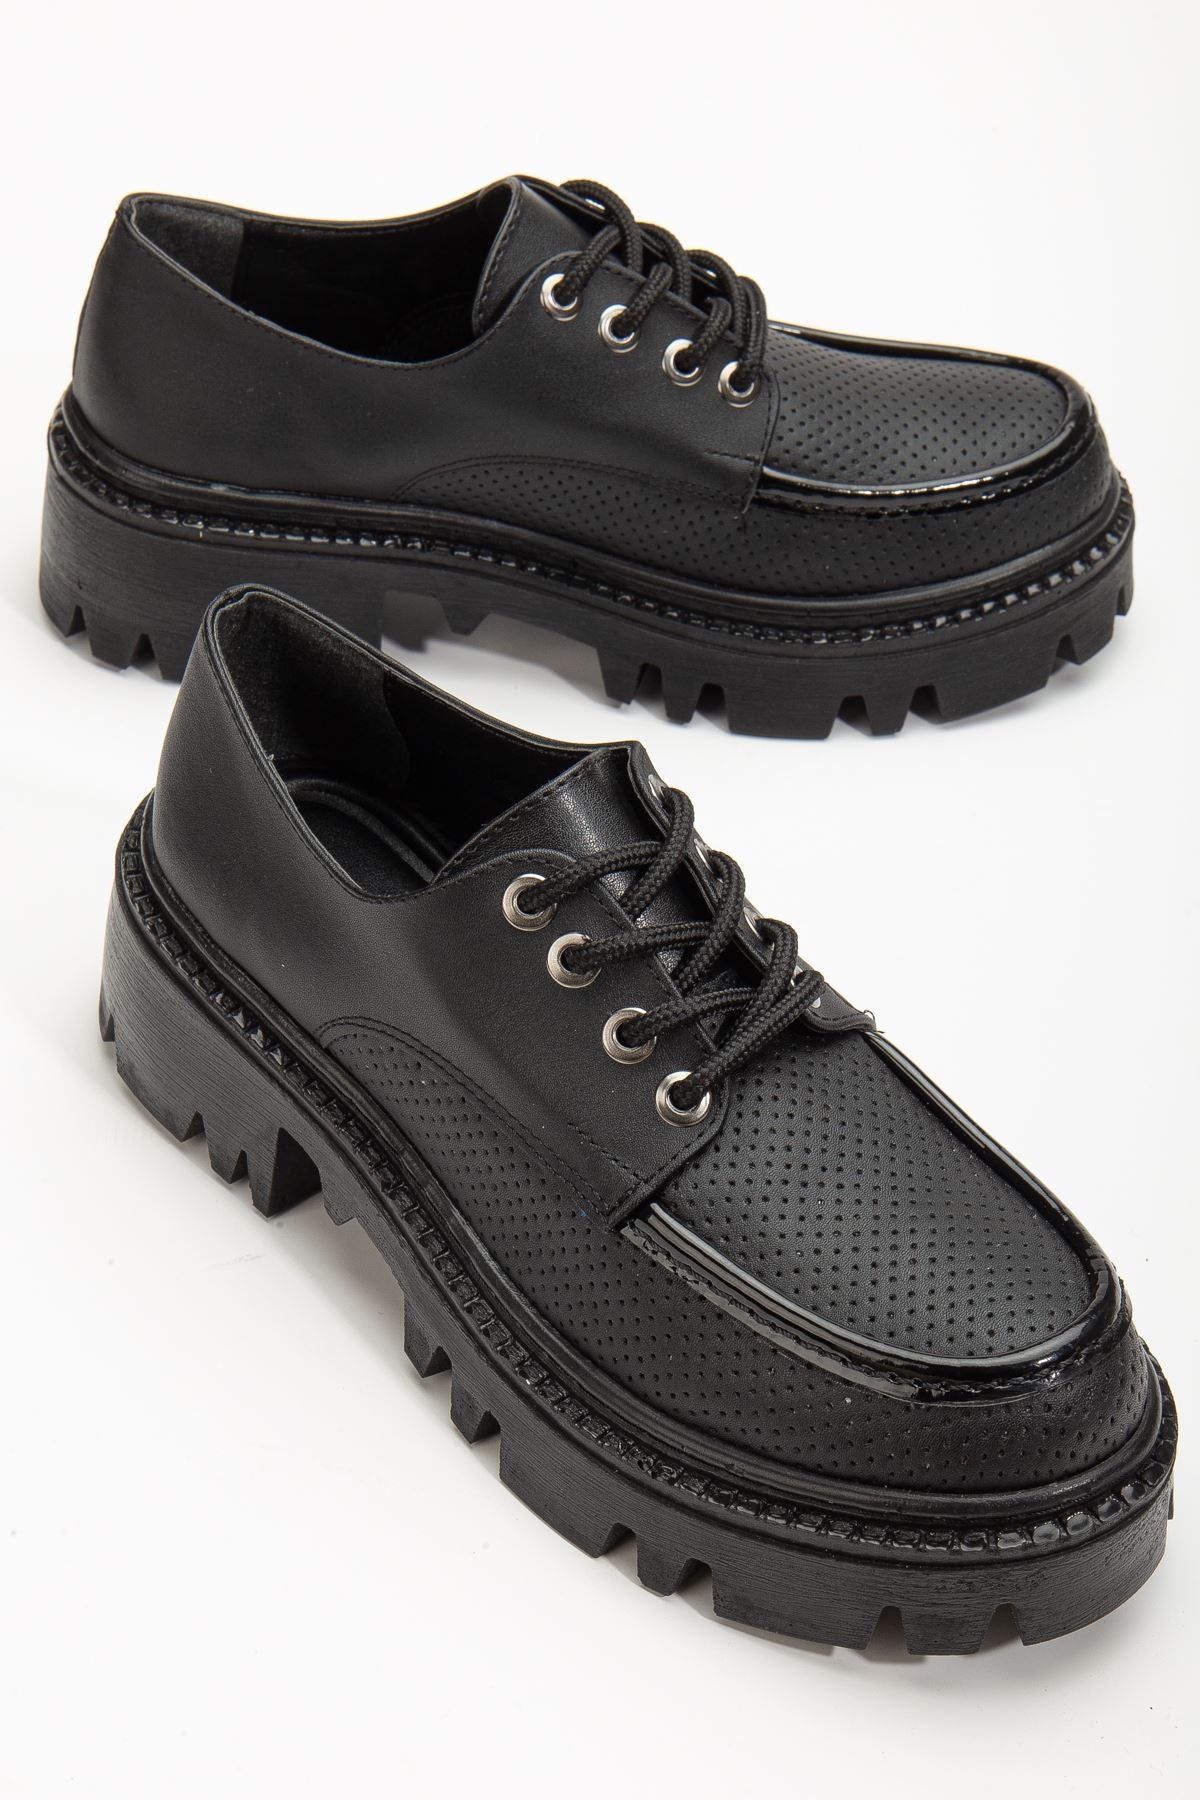 Women's Black Lace Detailed Oxford Shoes - STREETMODE ™